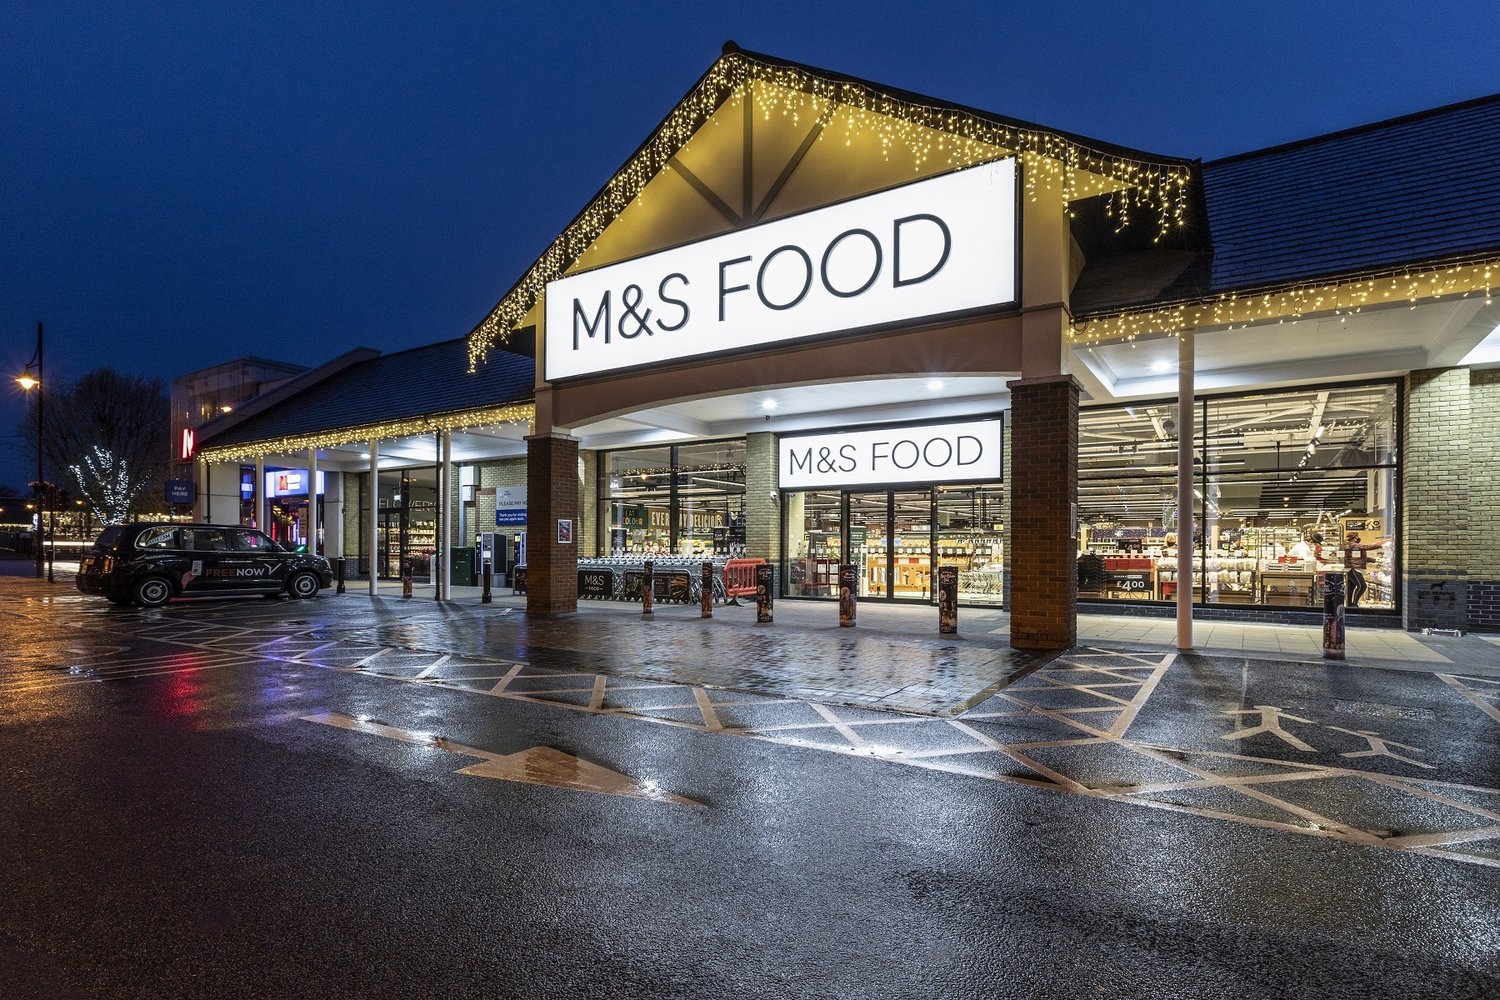 Widd Signs creates more striking store signage for M&S